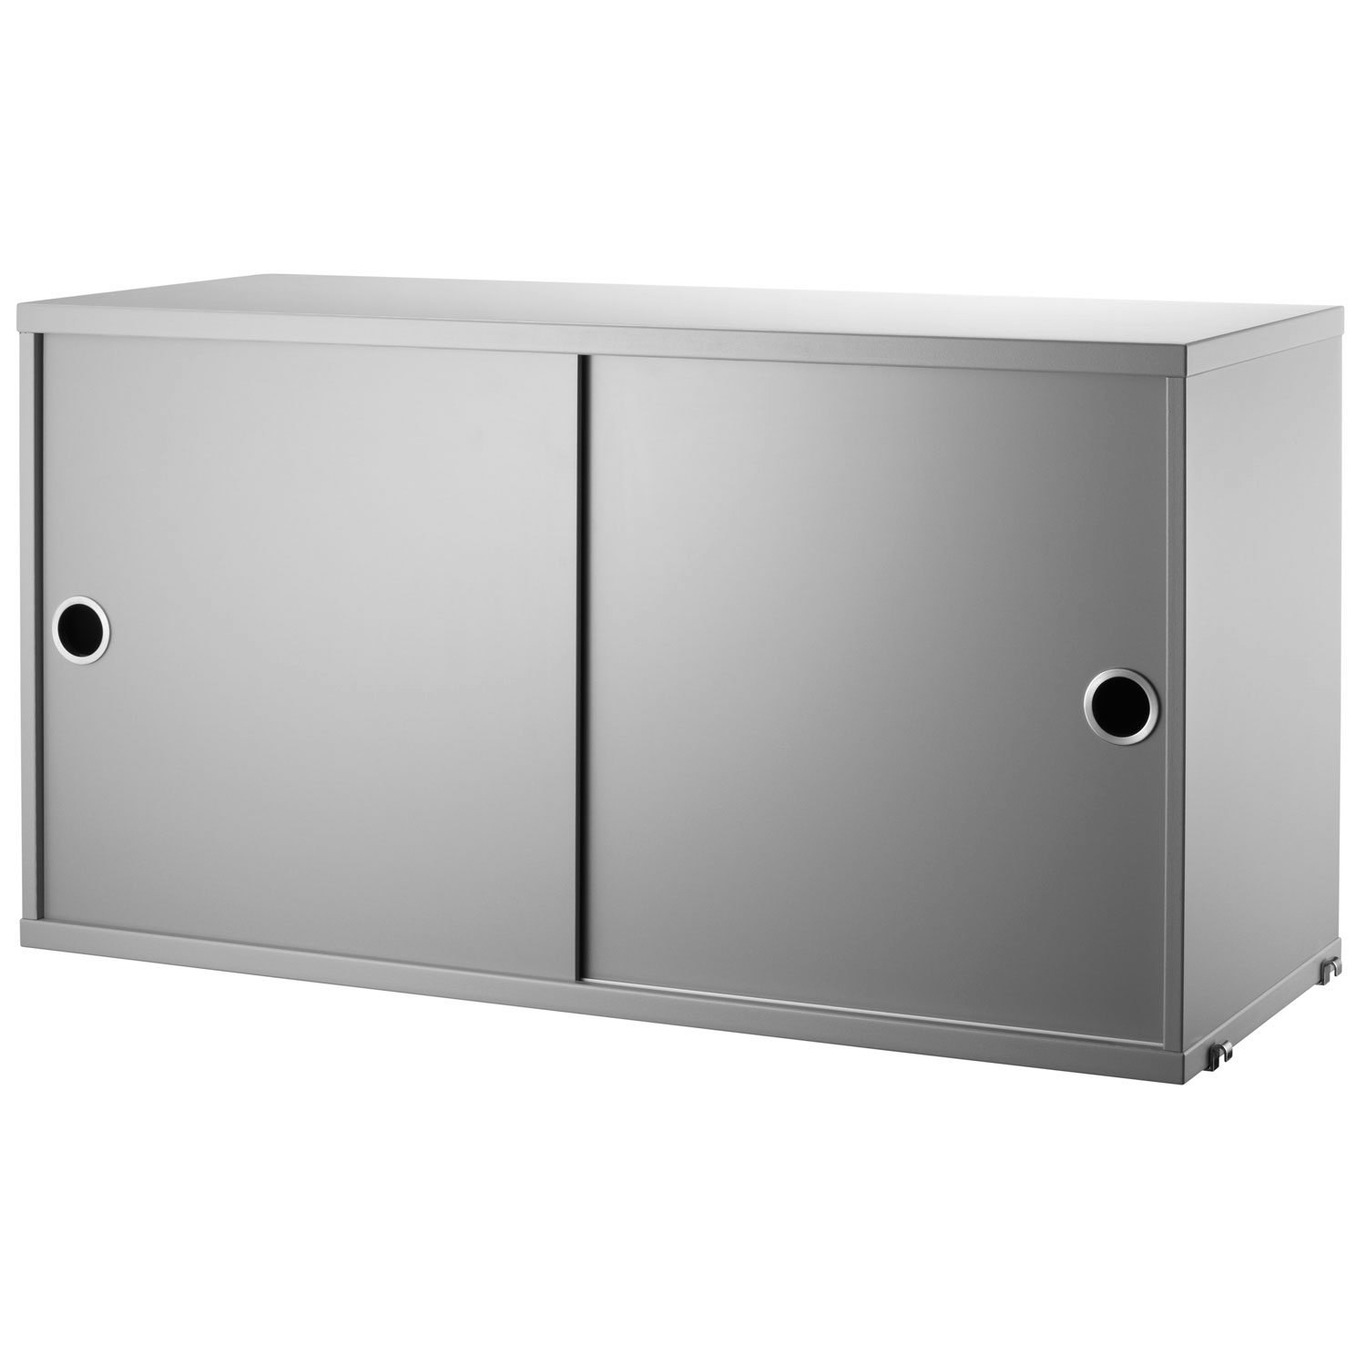 String Cabinet With Sliding Doors 30x78 cm, Grey